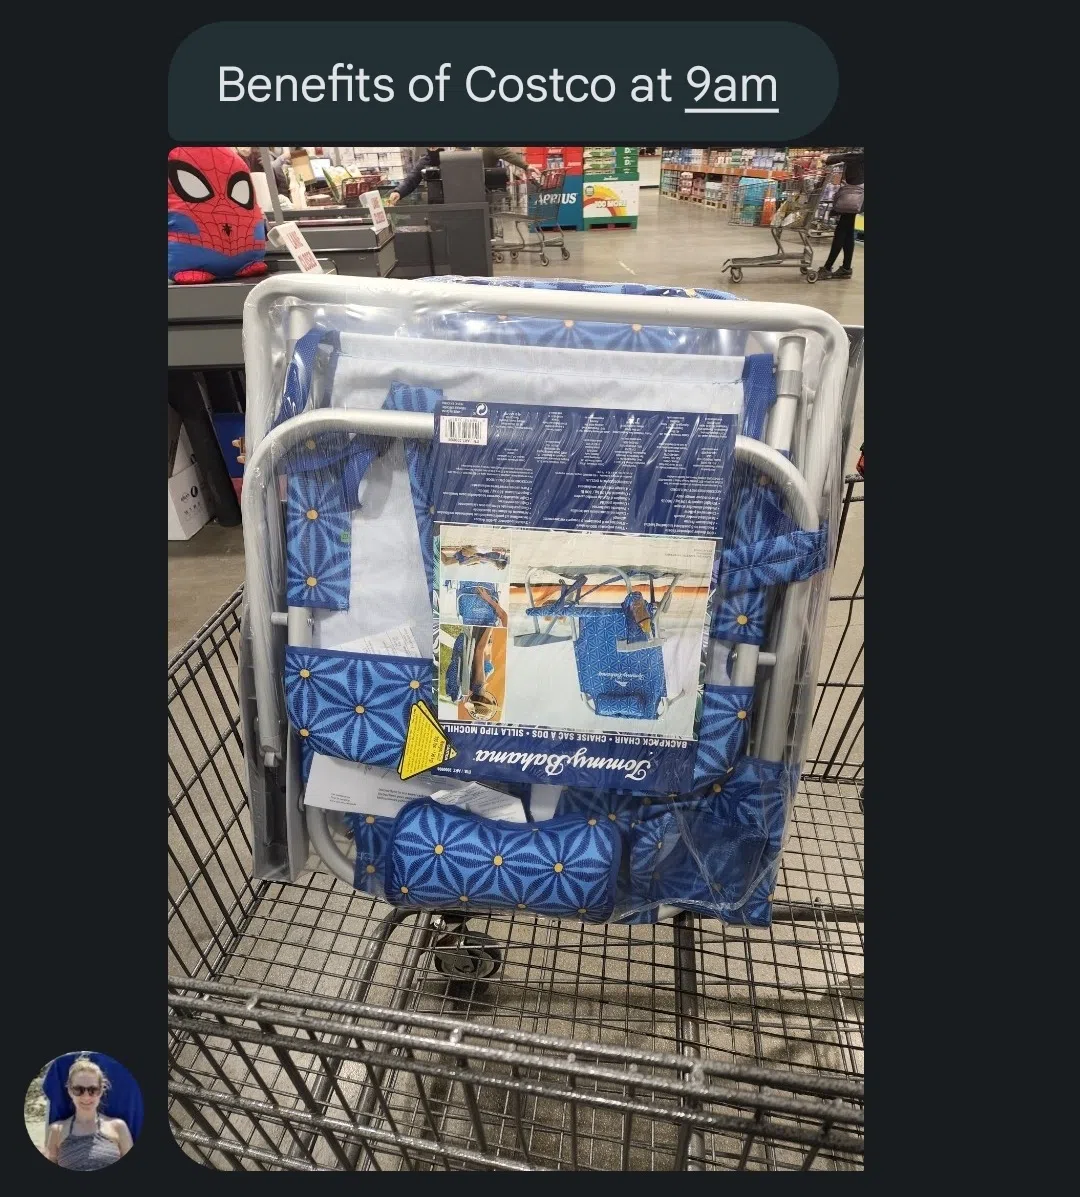 The HOTTEST Costco ticket in the HRM!